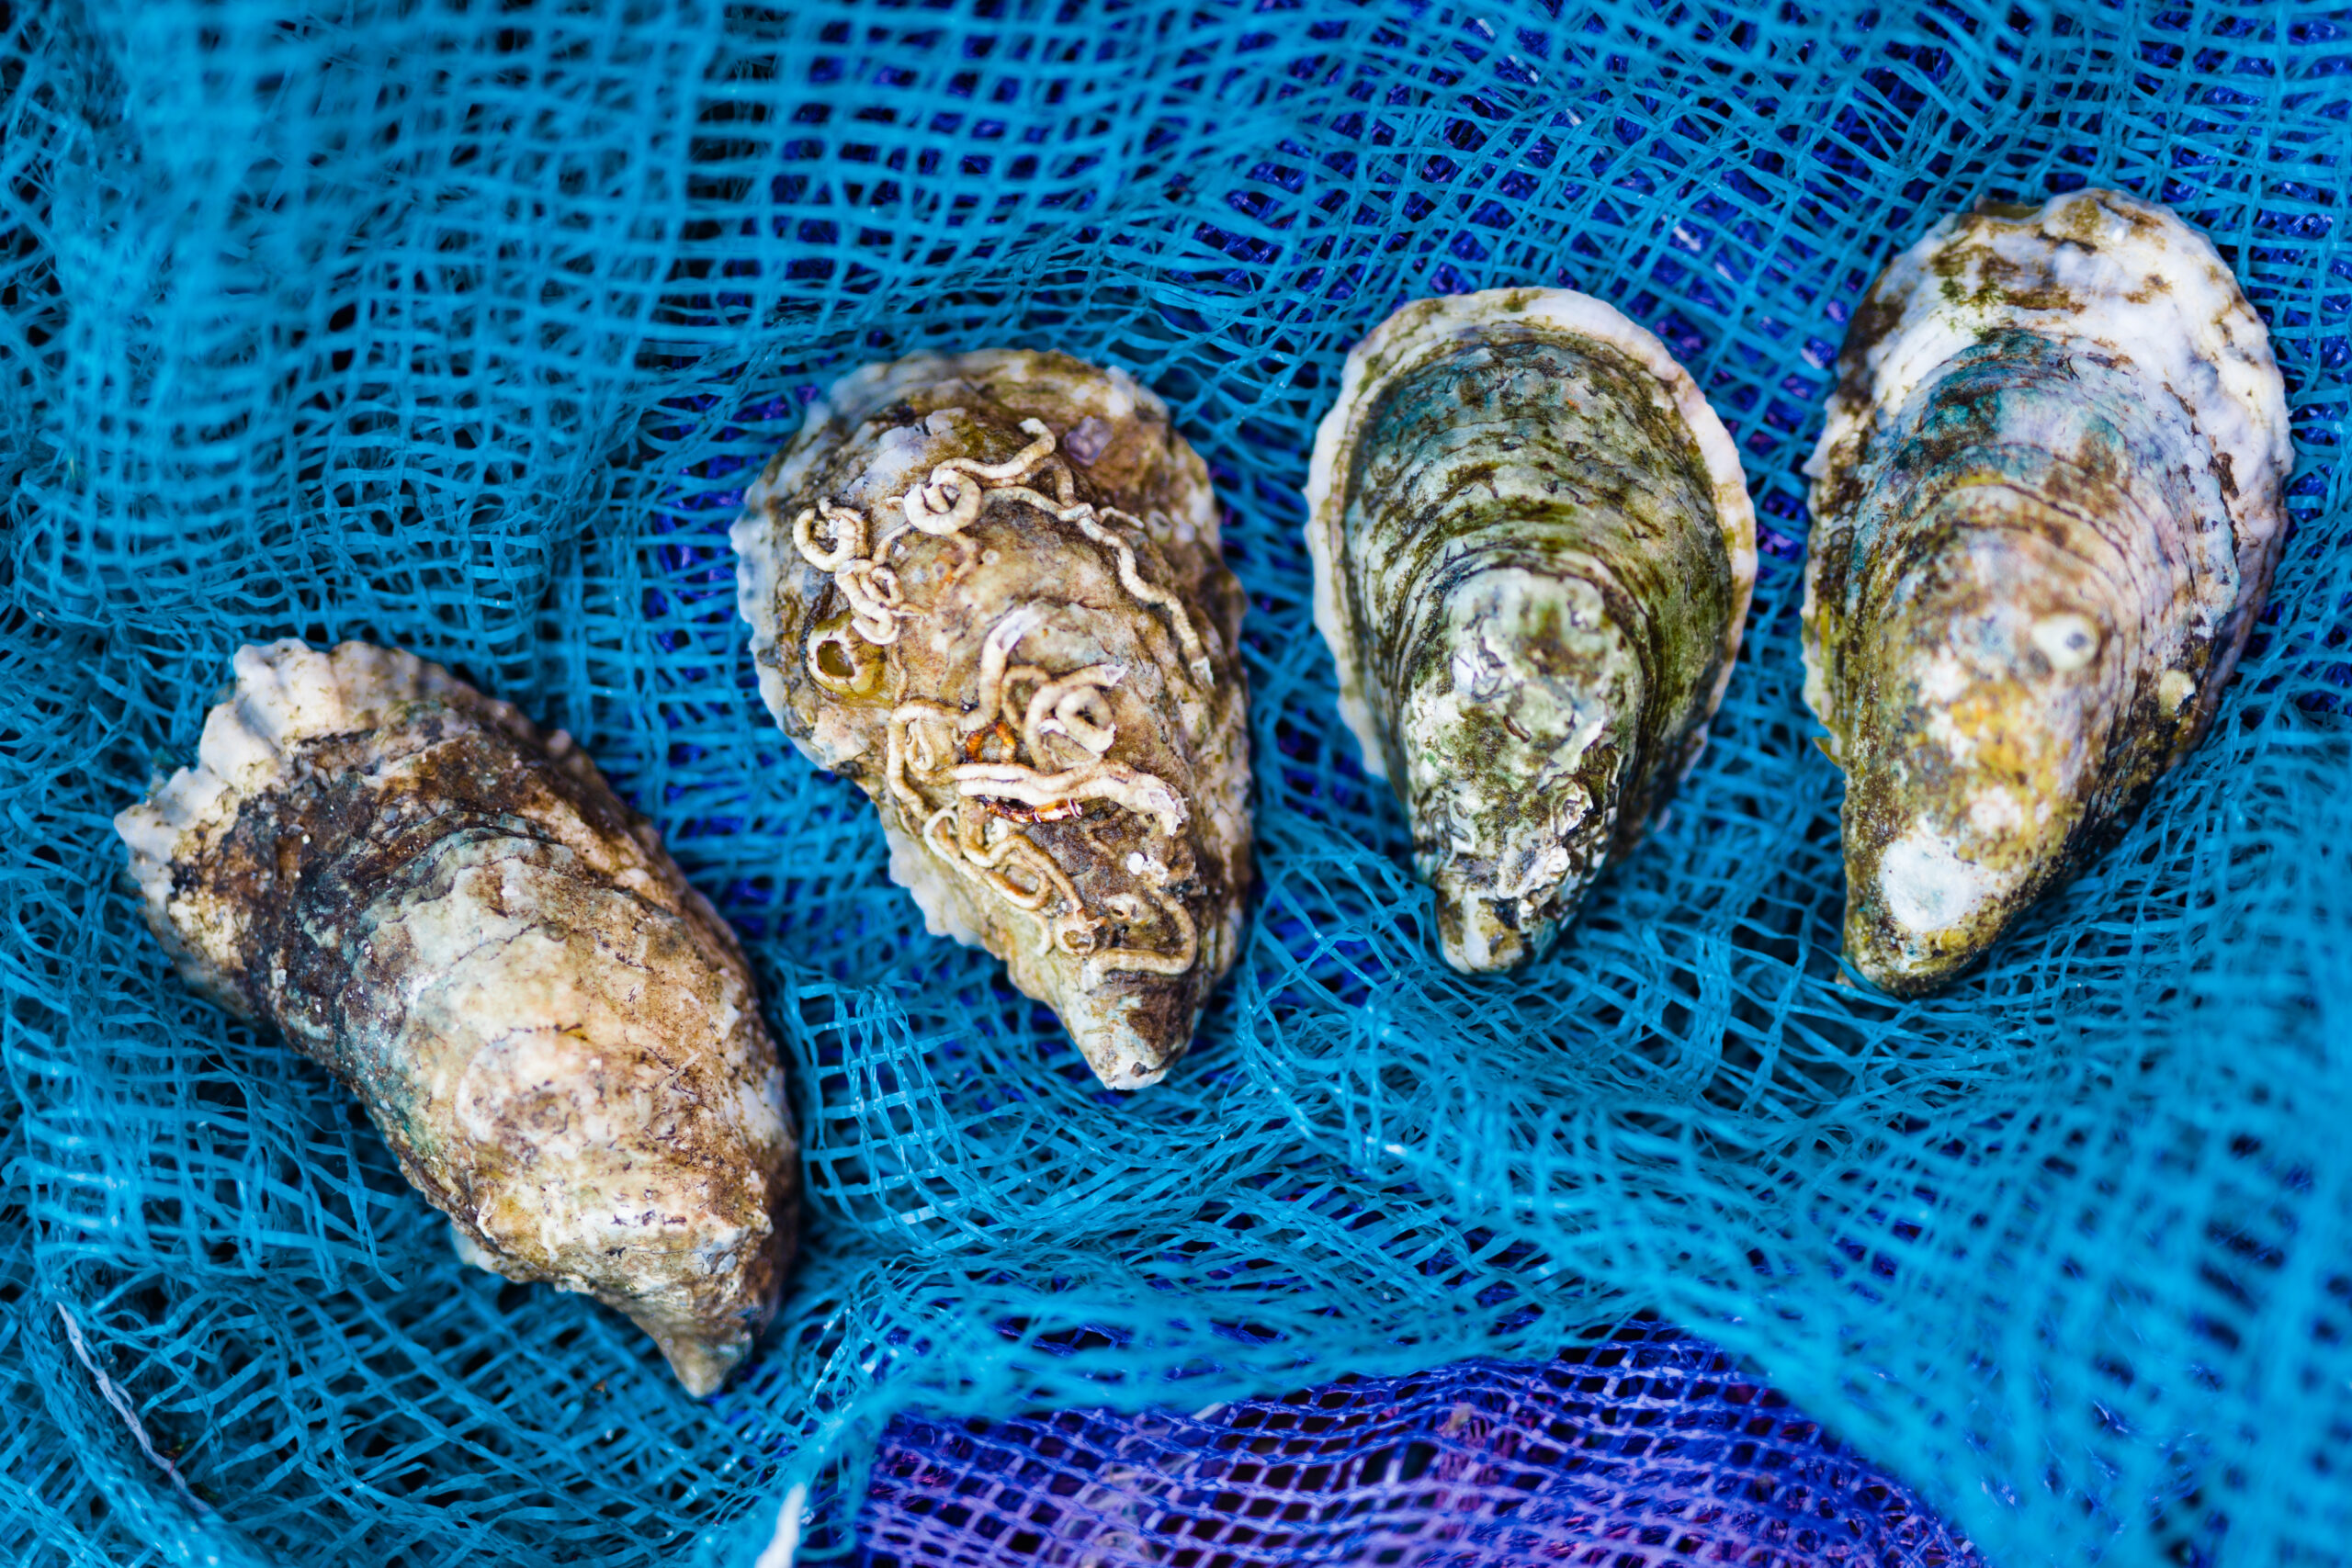 Oysters grown through aquaculture